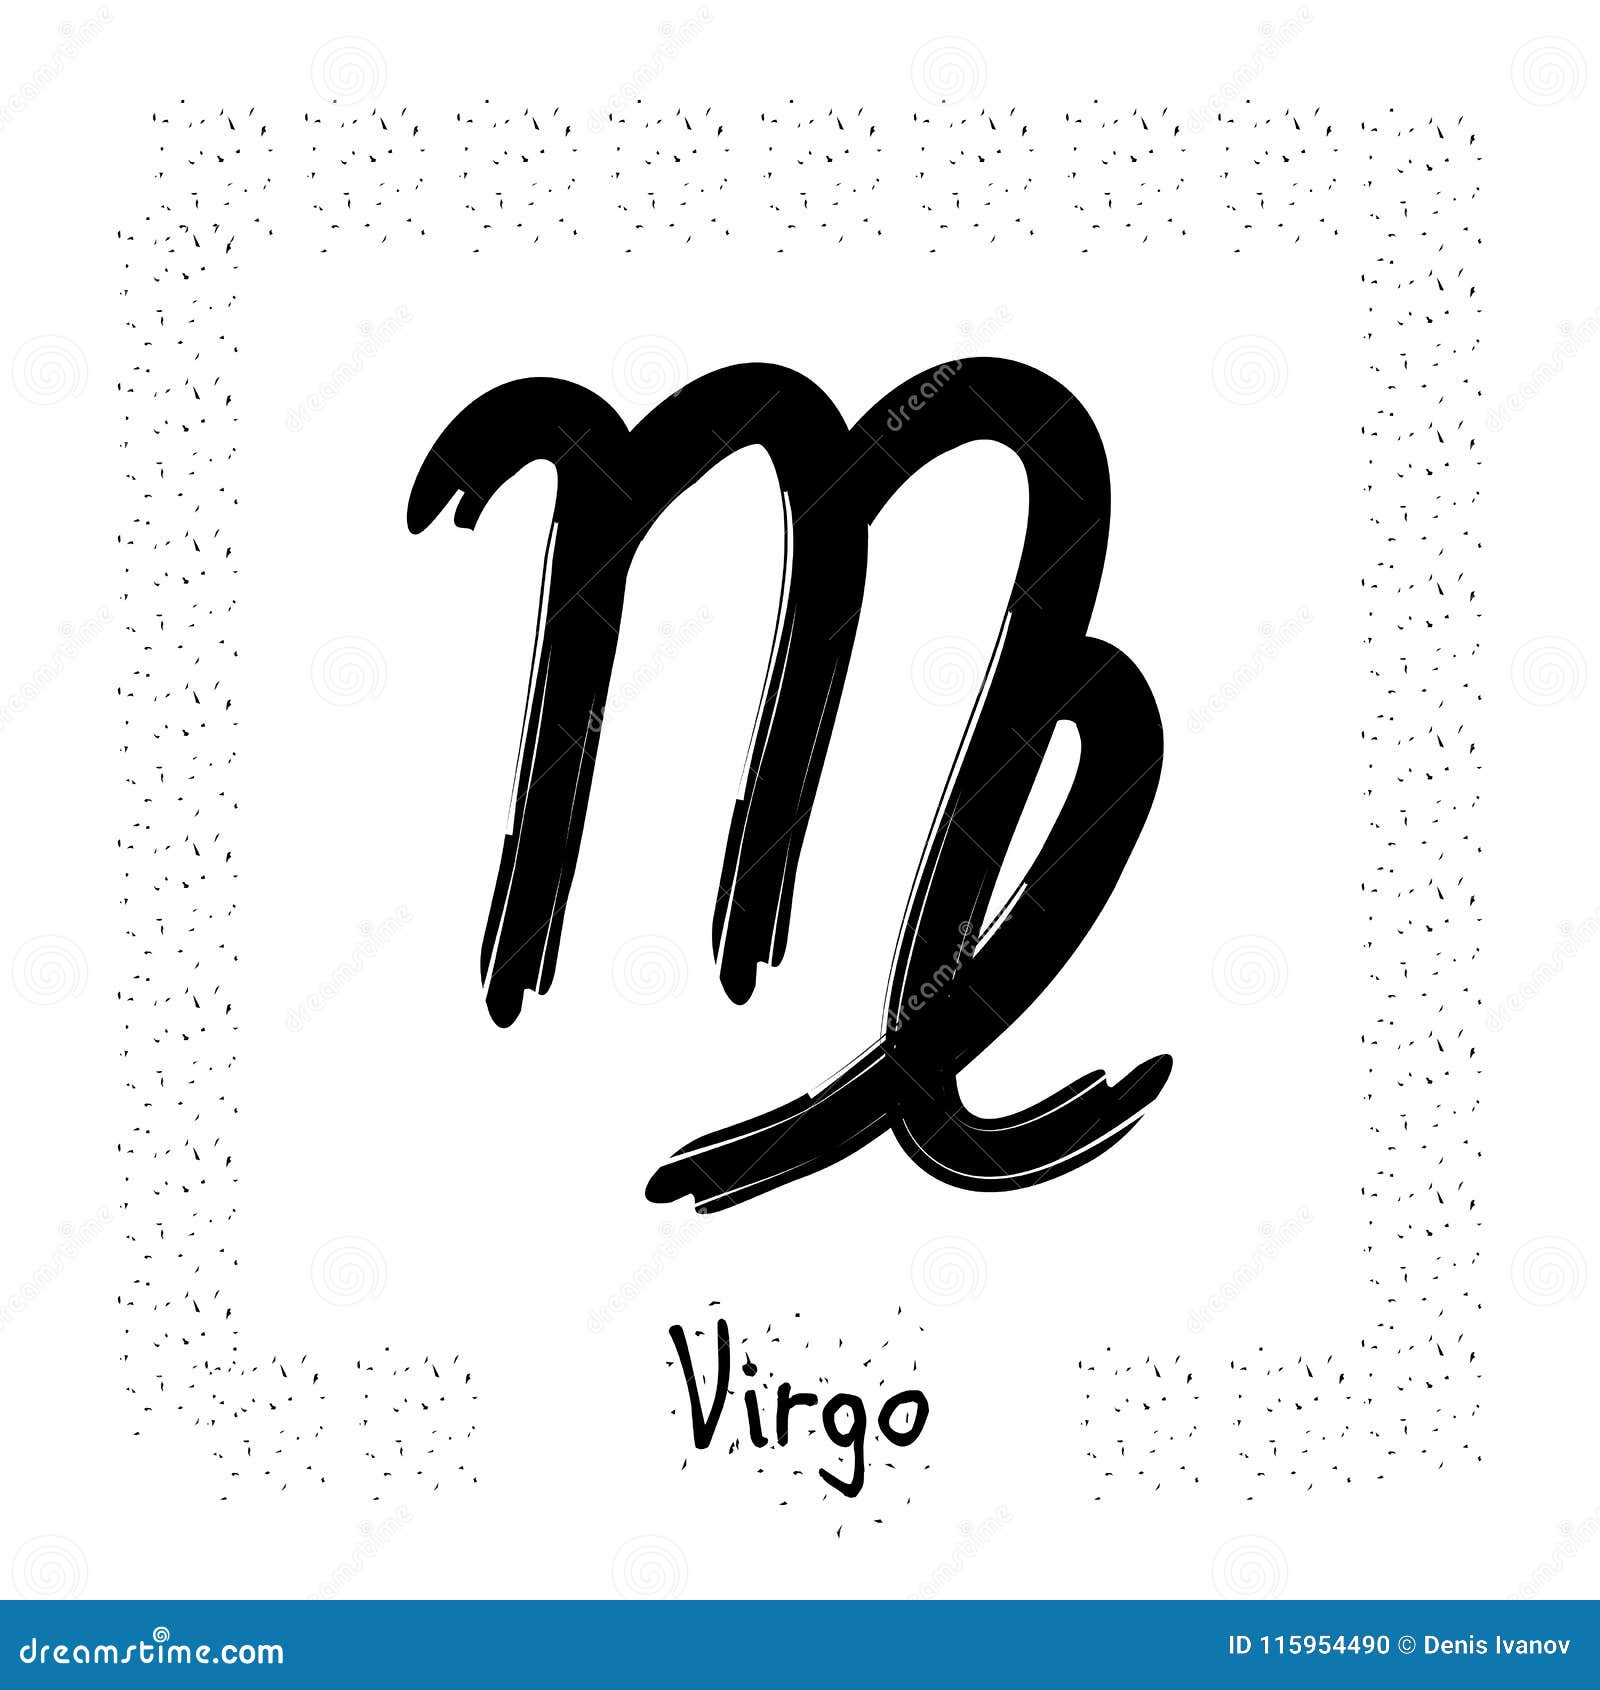 Virgo Vector Zodiac Sign, Hand Drawn with Ink Brush Stock Vector ...